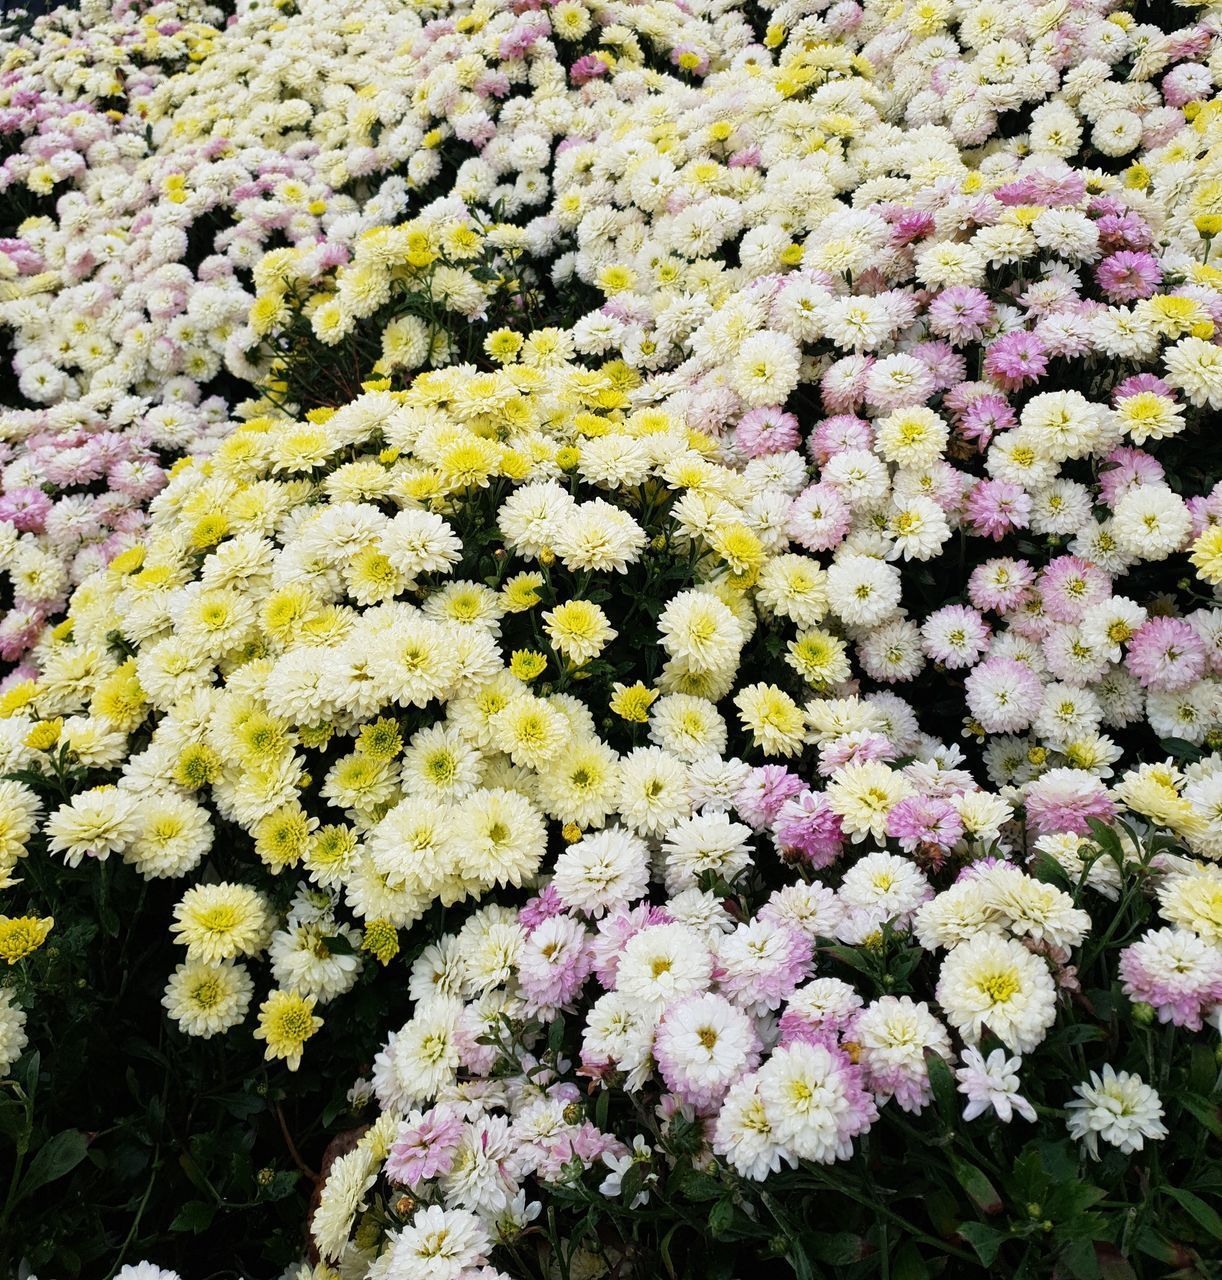 CLOSE-UP OF FLOWERING PLANTS